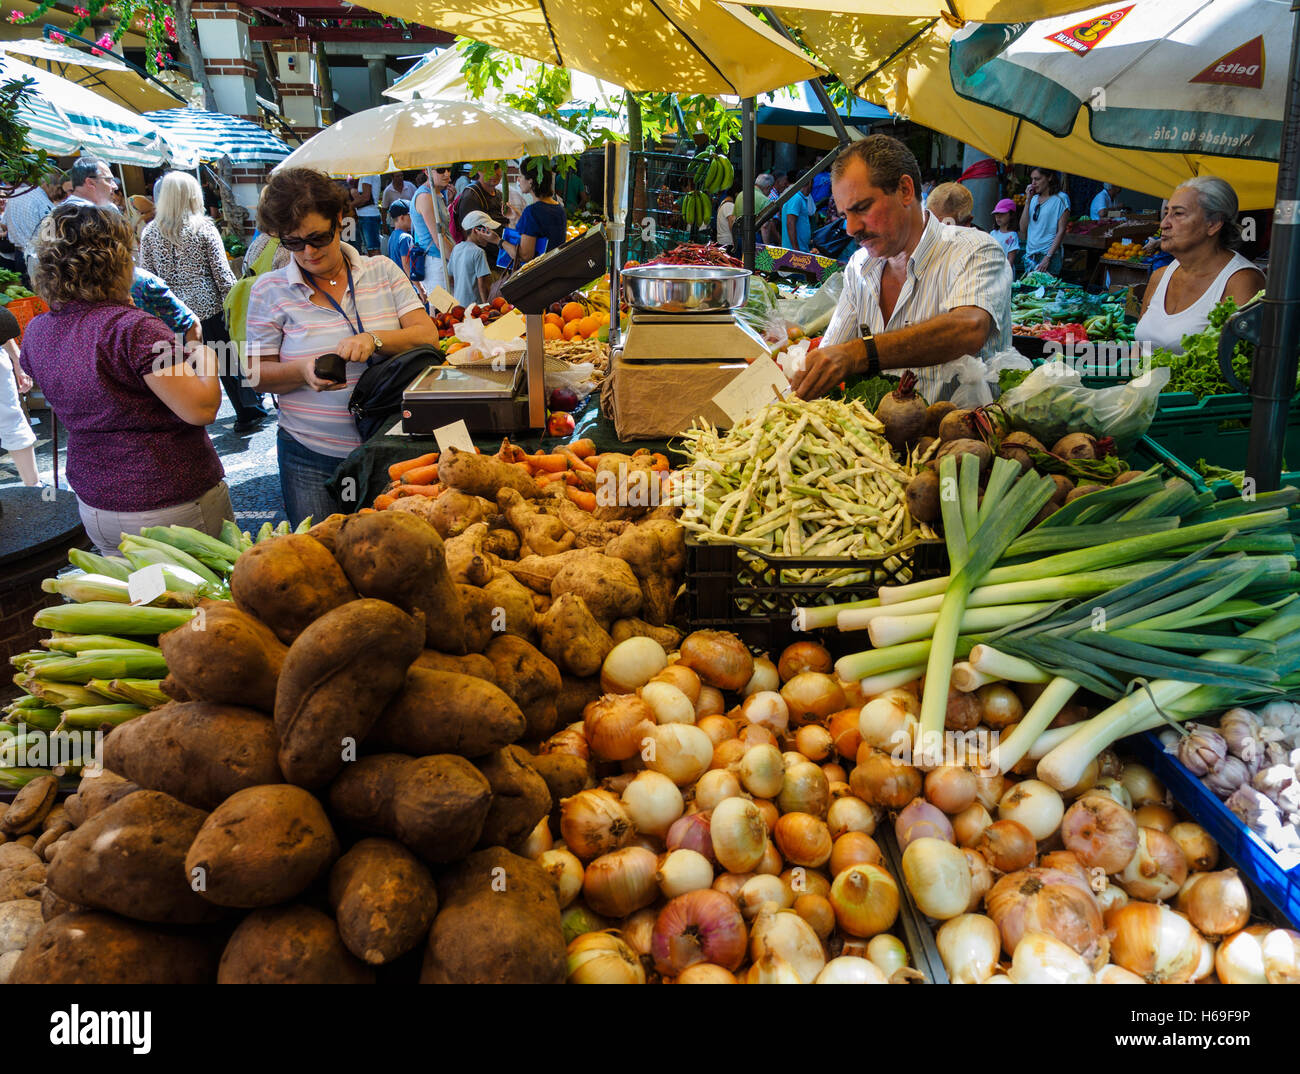 Fruit and vegetables are for sale in the Funchal market hall on the Portuguese island of Madeira Stock Photo